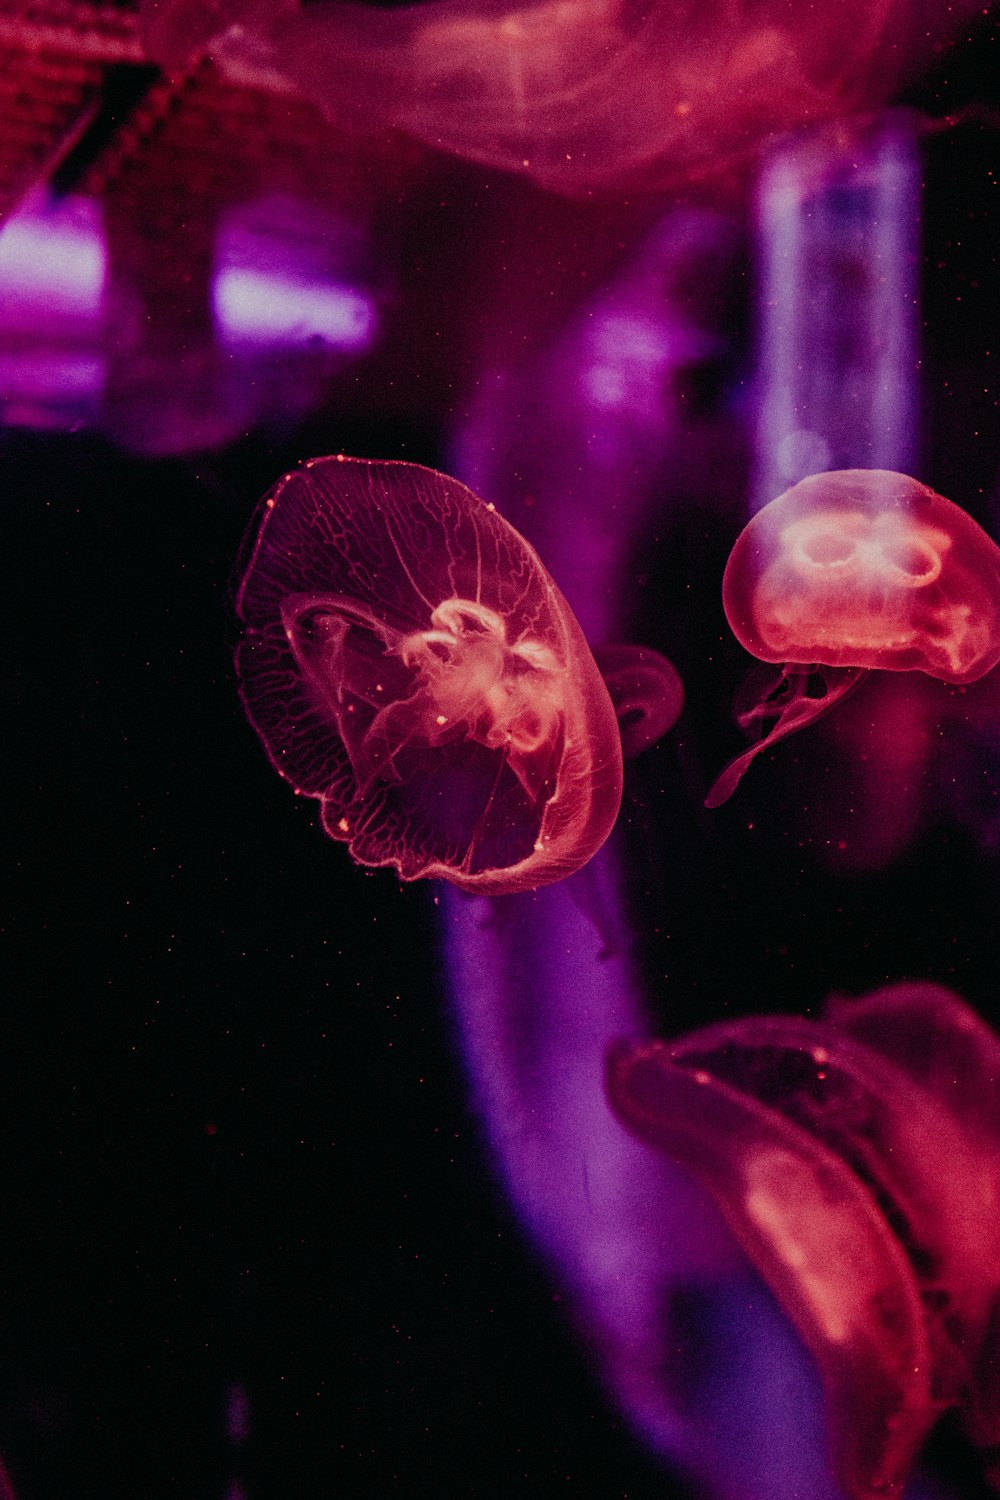 low-light photo of jelly fish